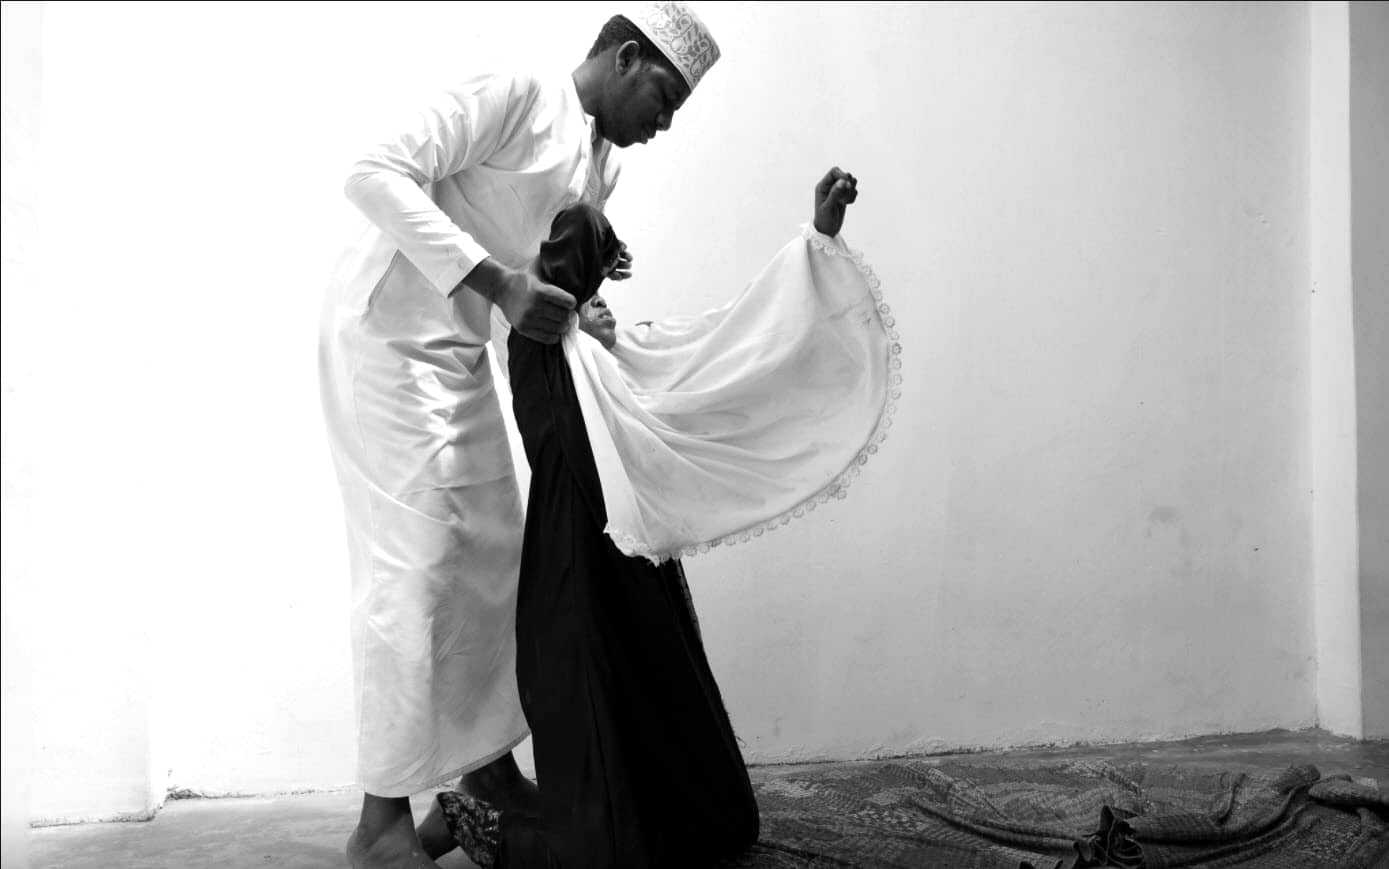 Sheikh trying to wake a woman by pouring water on her neck - Zanzibar